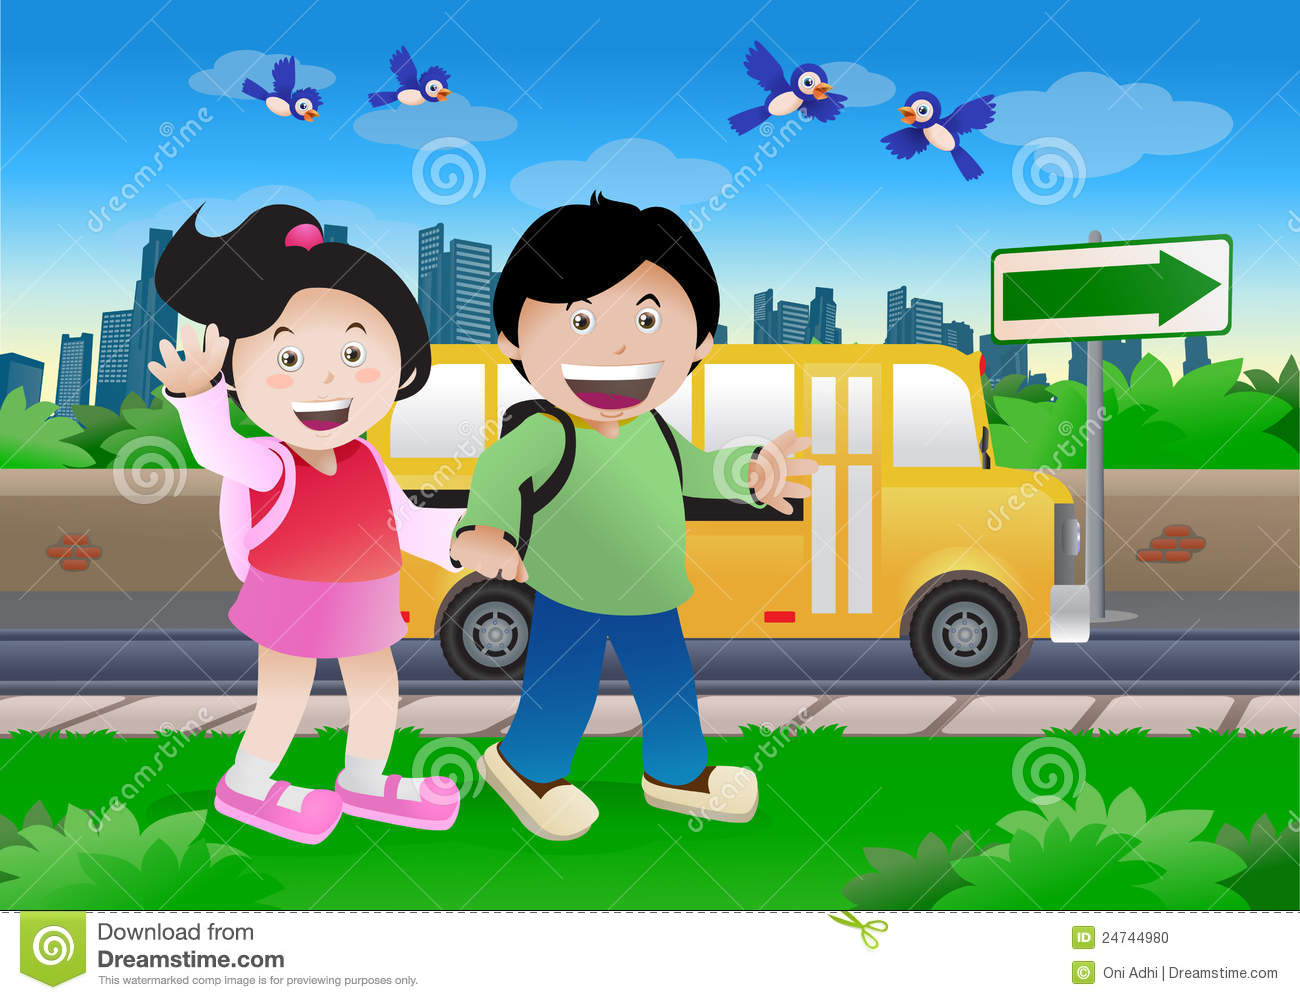 Illustration Of A Boy And Girl Go To School Together About To Ride A